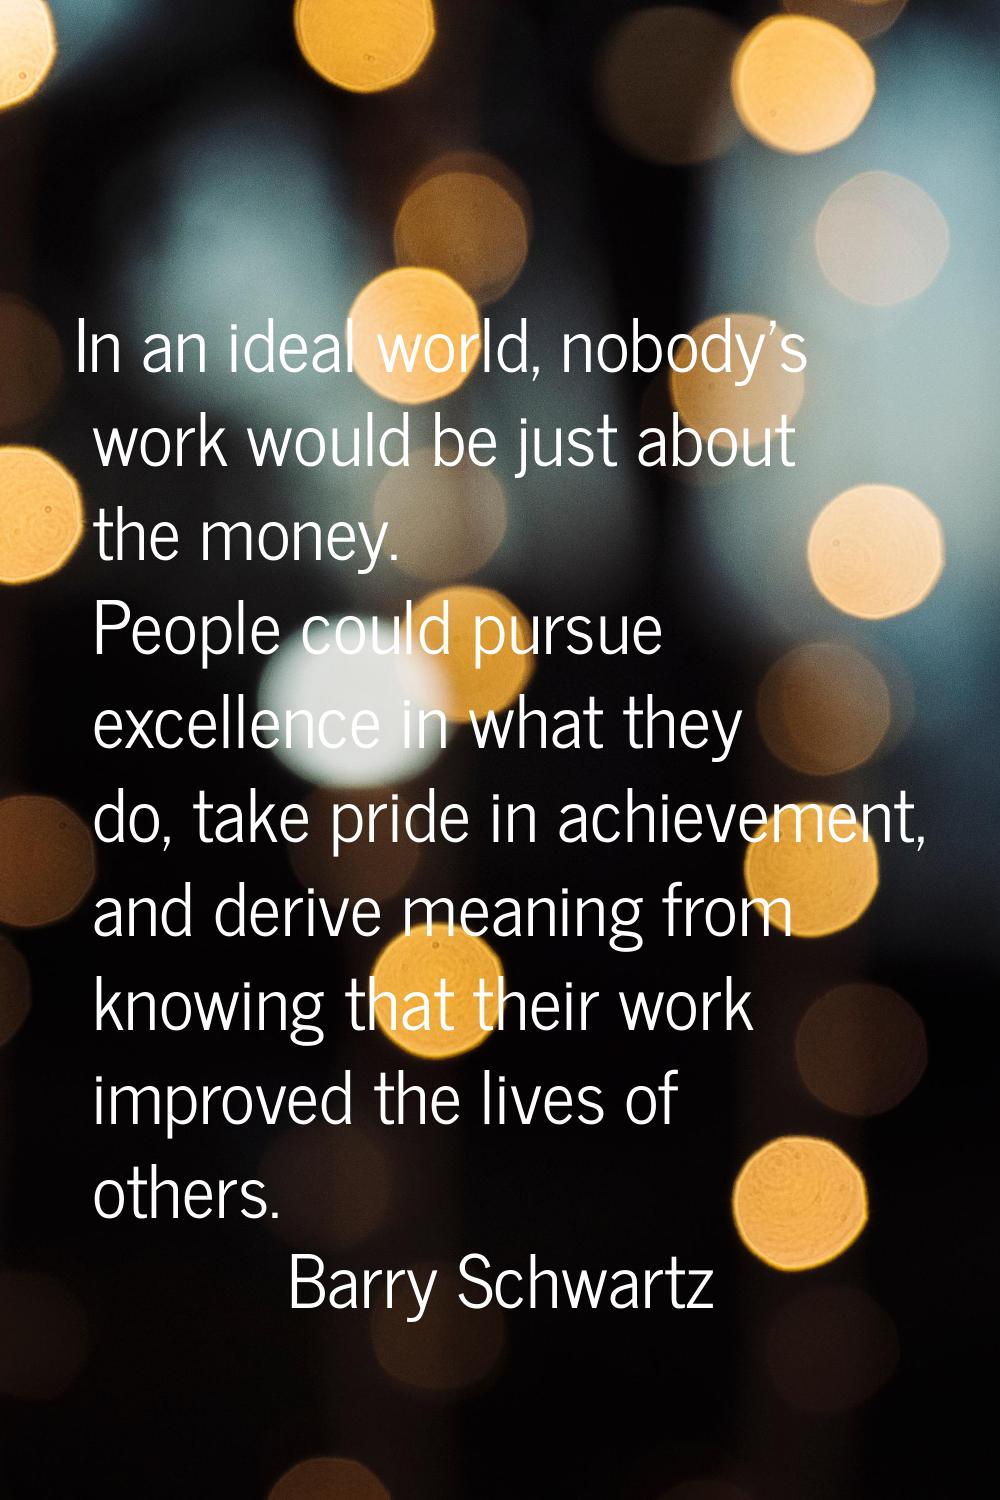 In an ideal world, nobody's work would be just about the money. People could pursue excellence in w